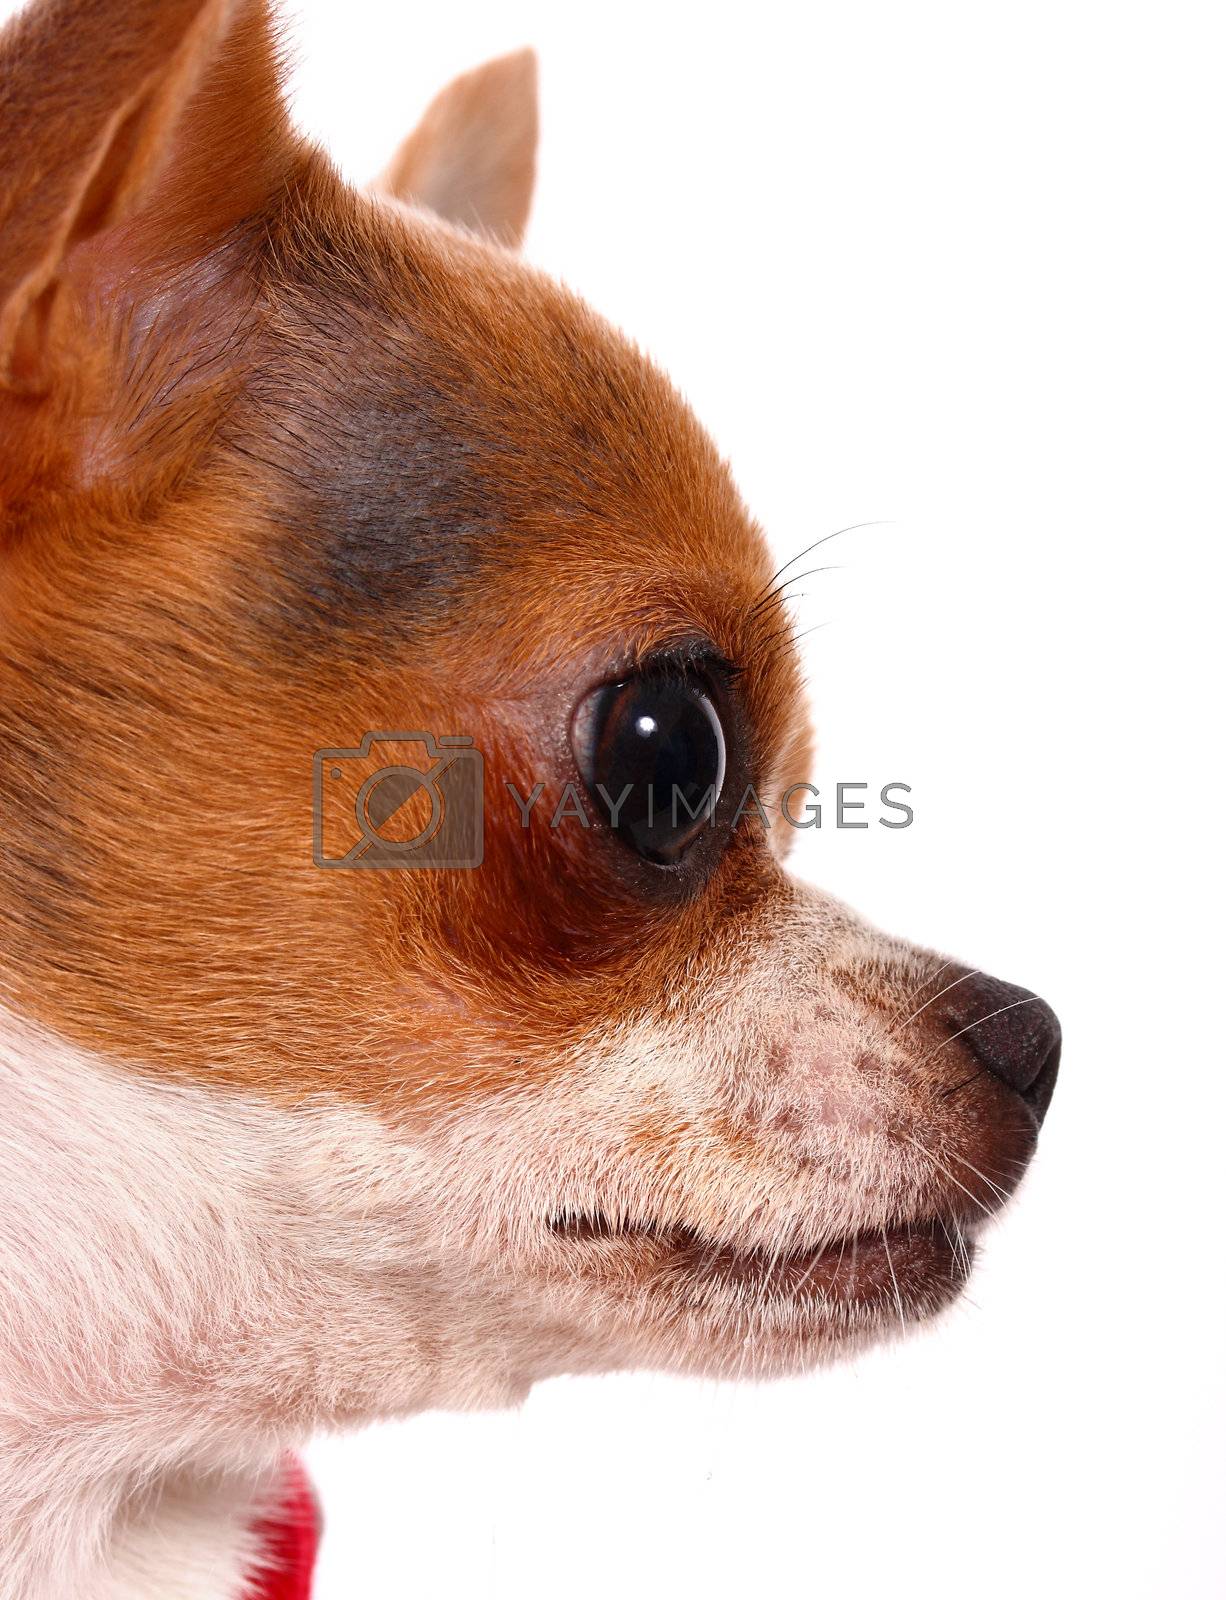 Close Up Of A Cute Little Chihuahua's Face